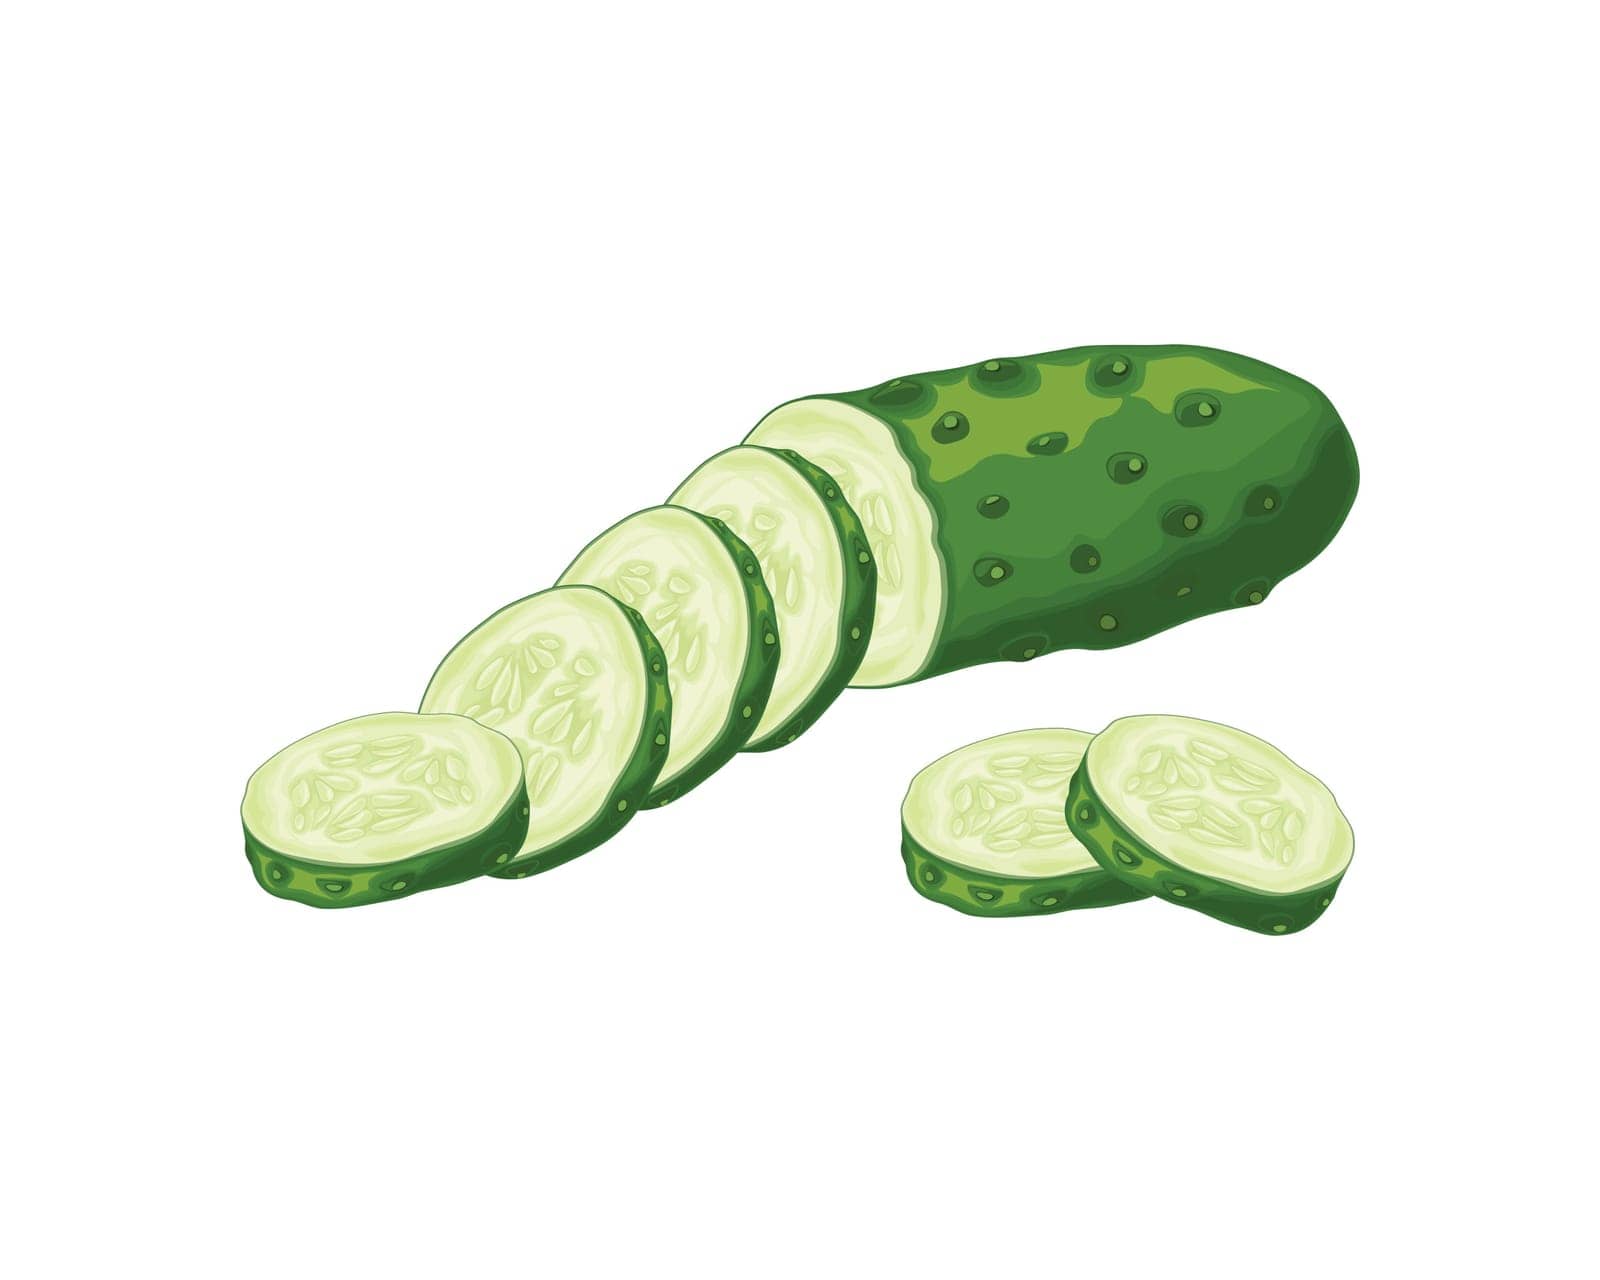 Cucumber. A ripe cucumber is green in color. Cucumber cut into pieces. Fresh vegetable garden. A vegetarian product. Vector illustration isolated on a white background.